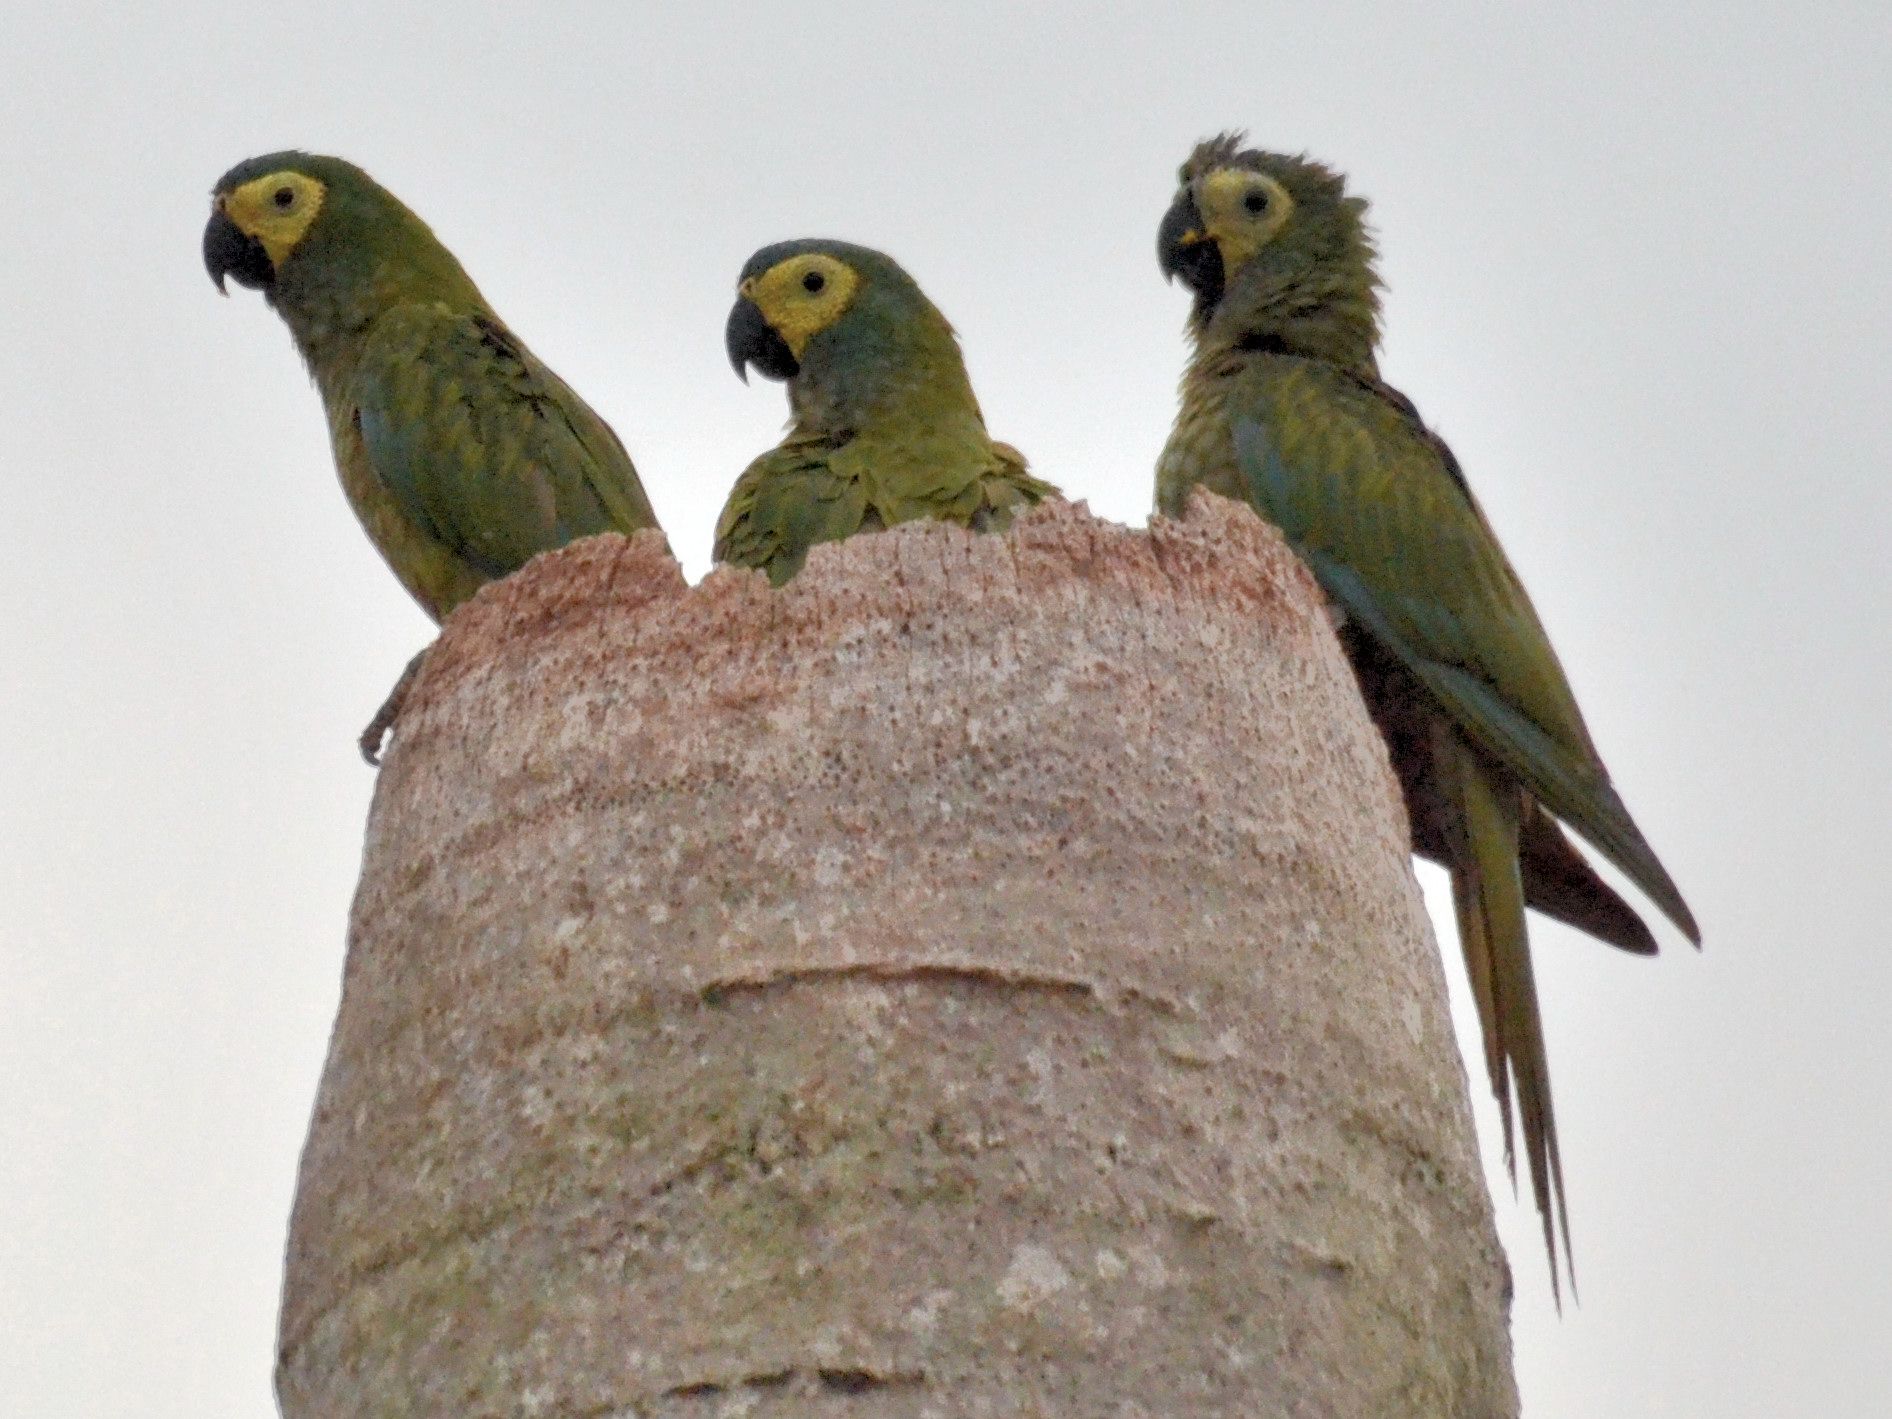 Click picture to see more Red-bellied Macaws.